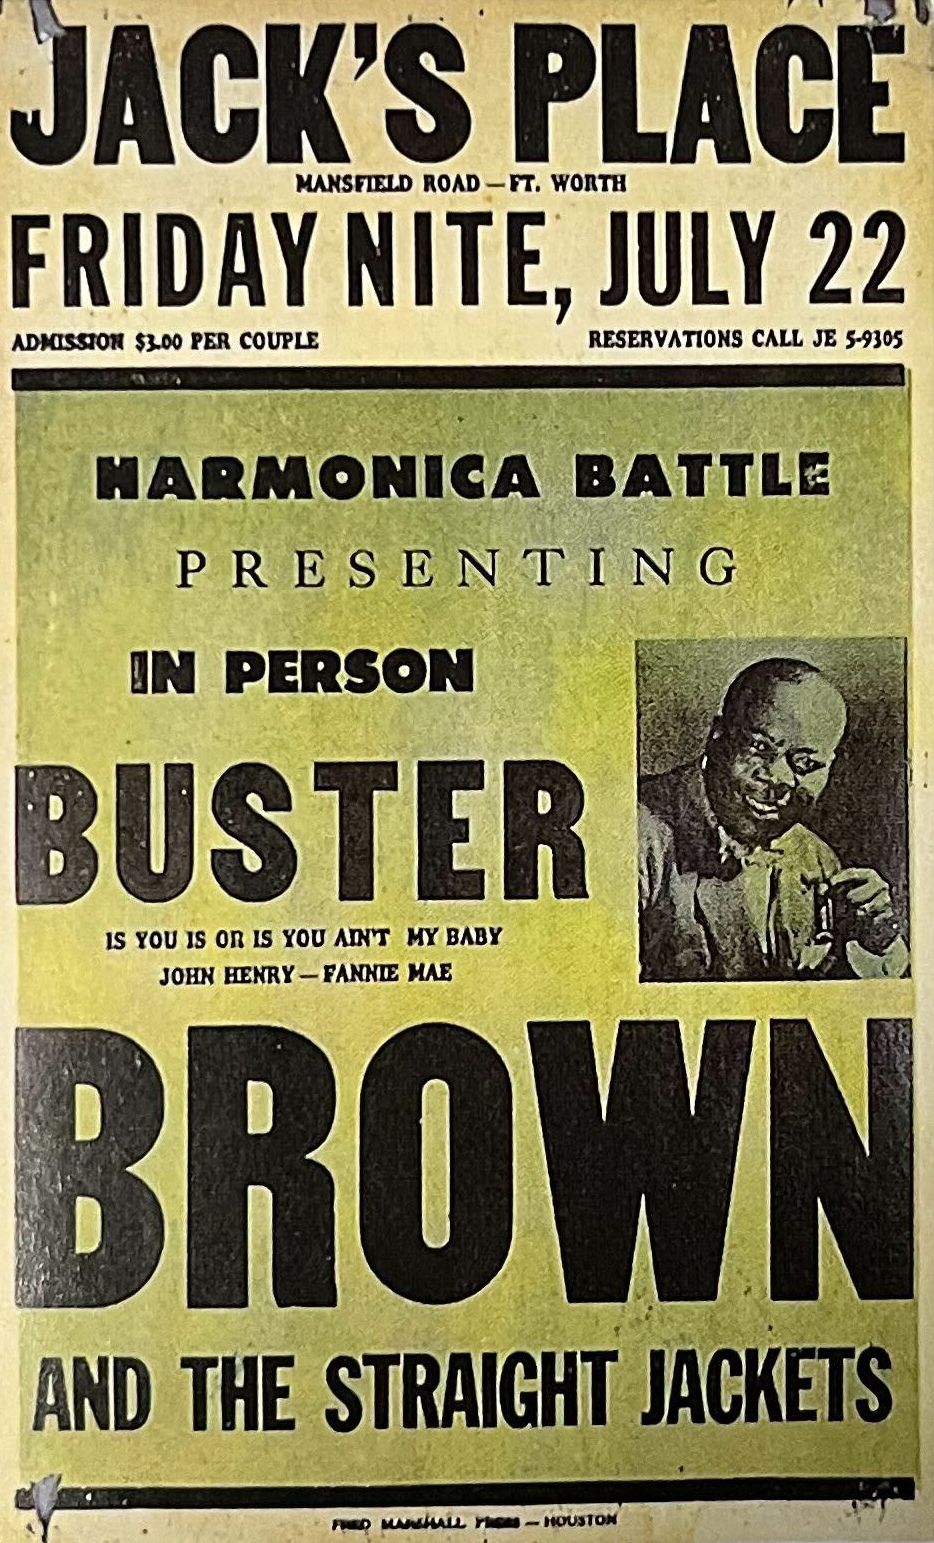 AOR-1.29 Buster Brown	Jack’s Place 1955 Concert Poster